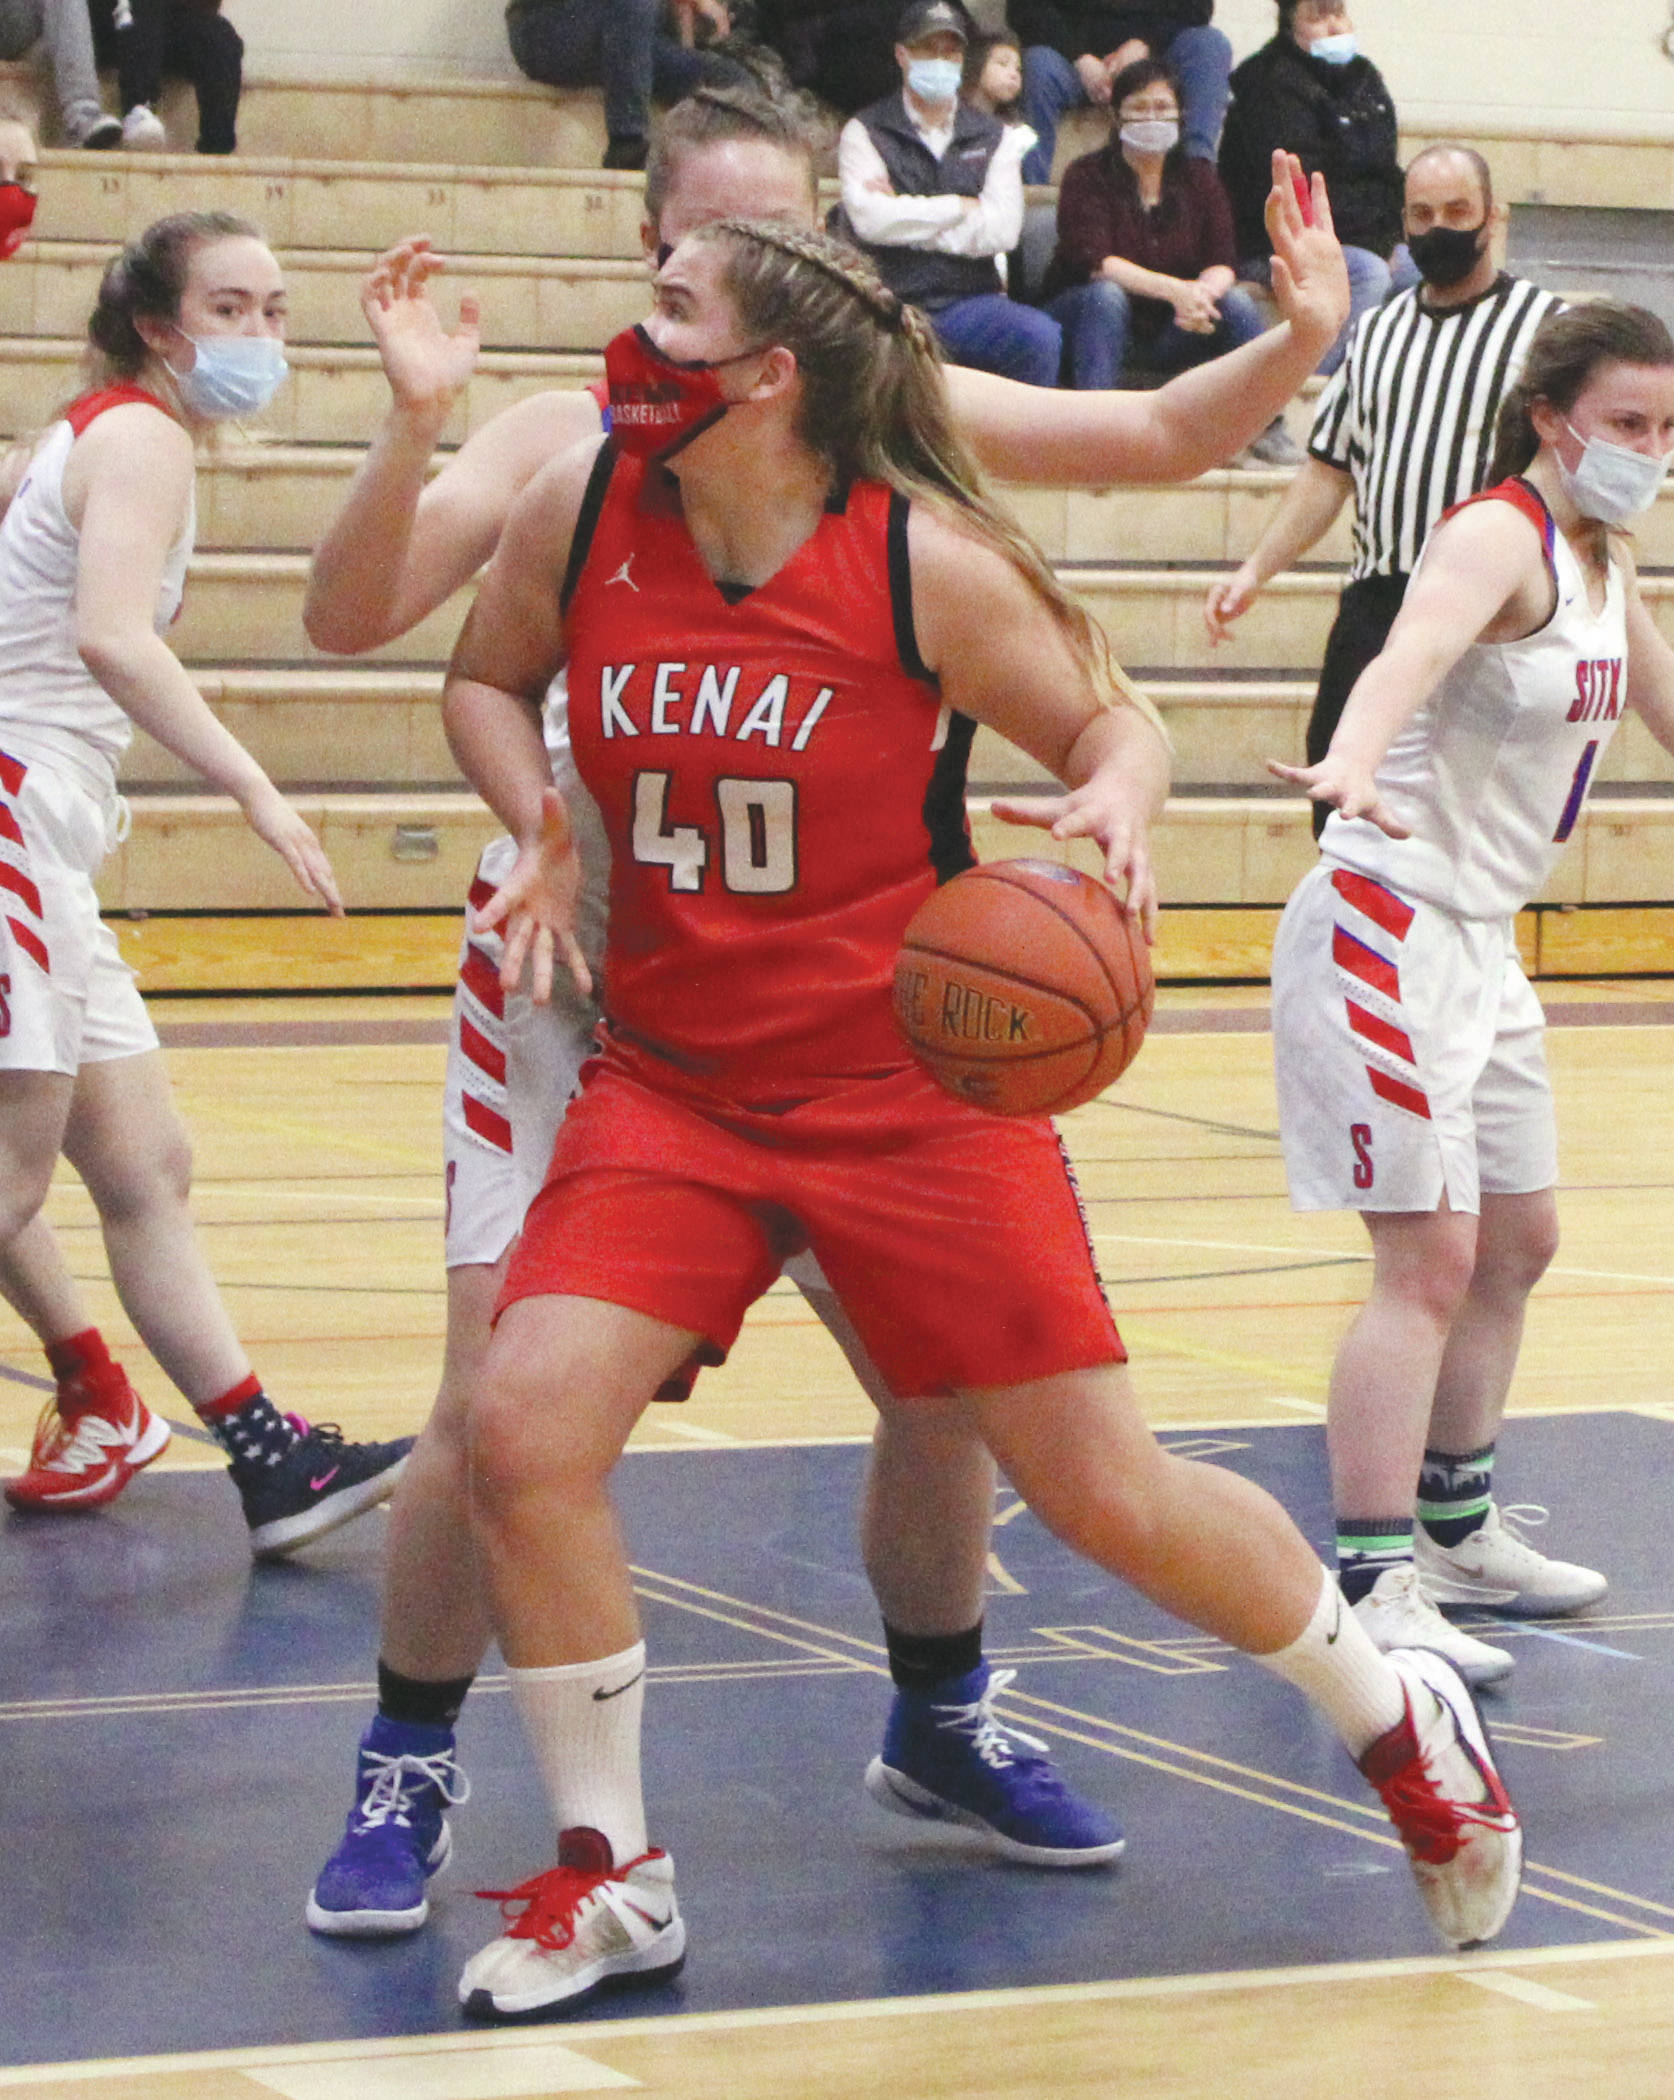 Kenai Central’s Emma Beck drives to the basket against Sitka on Thursday, March 25, 2021, at the Class 3A state girls tournament at Palmer Middle School in Palmer, Alaska. (Photo by Tim Rockey/Frontiersman)